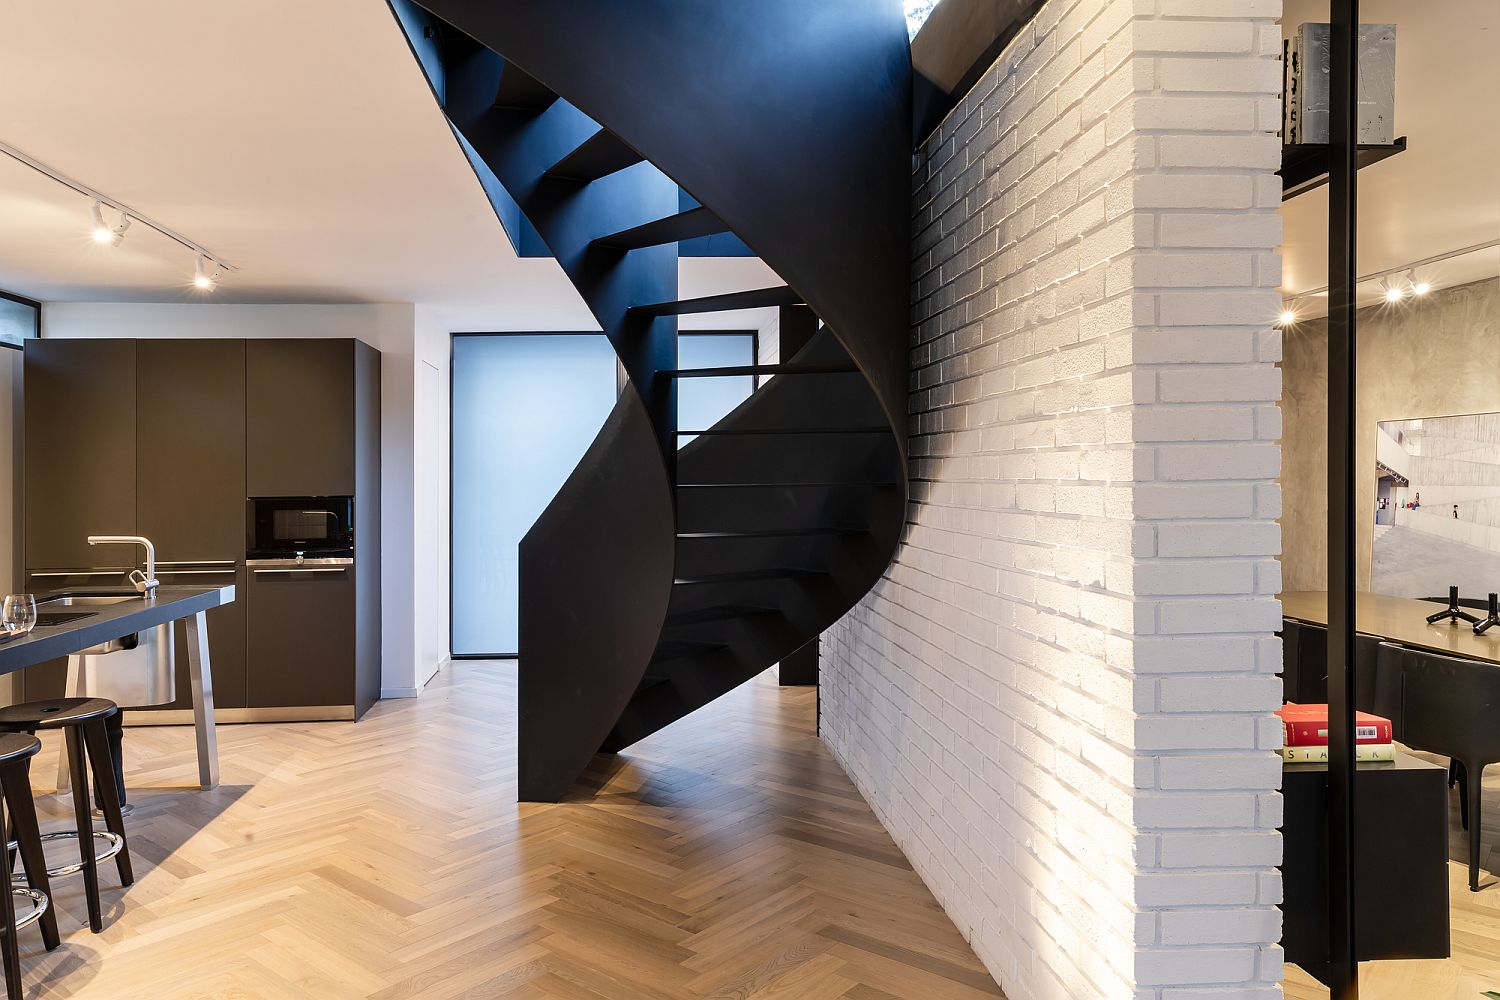 Brick wall divides the lower level of the house and offers white backdrop for the spiral staircase in black